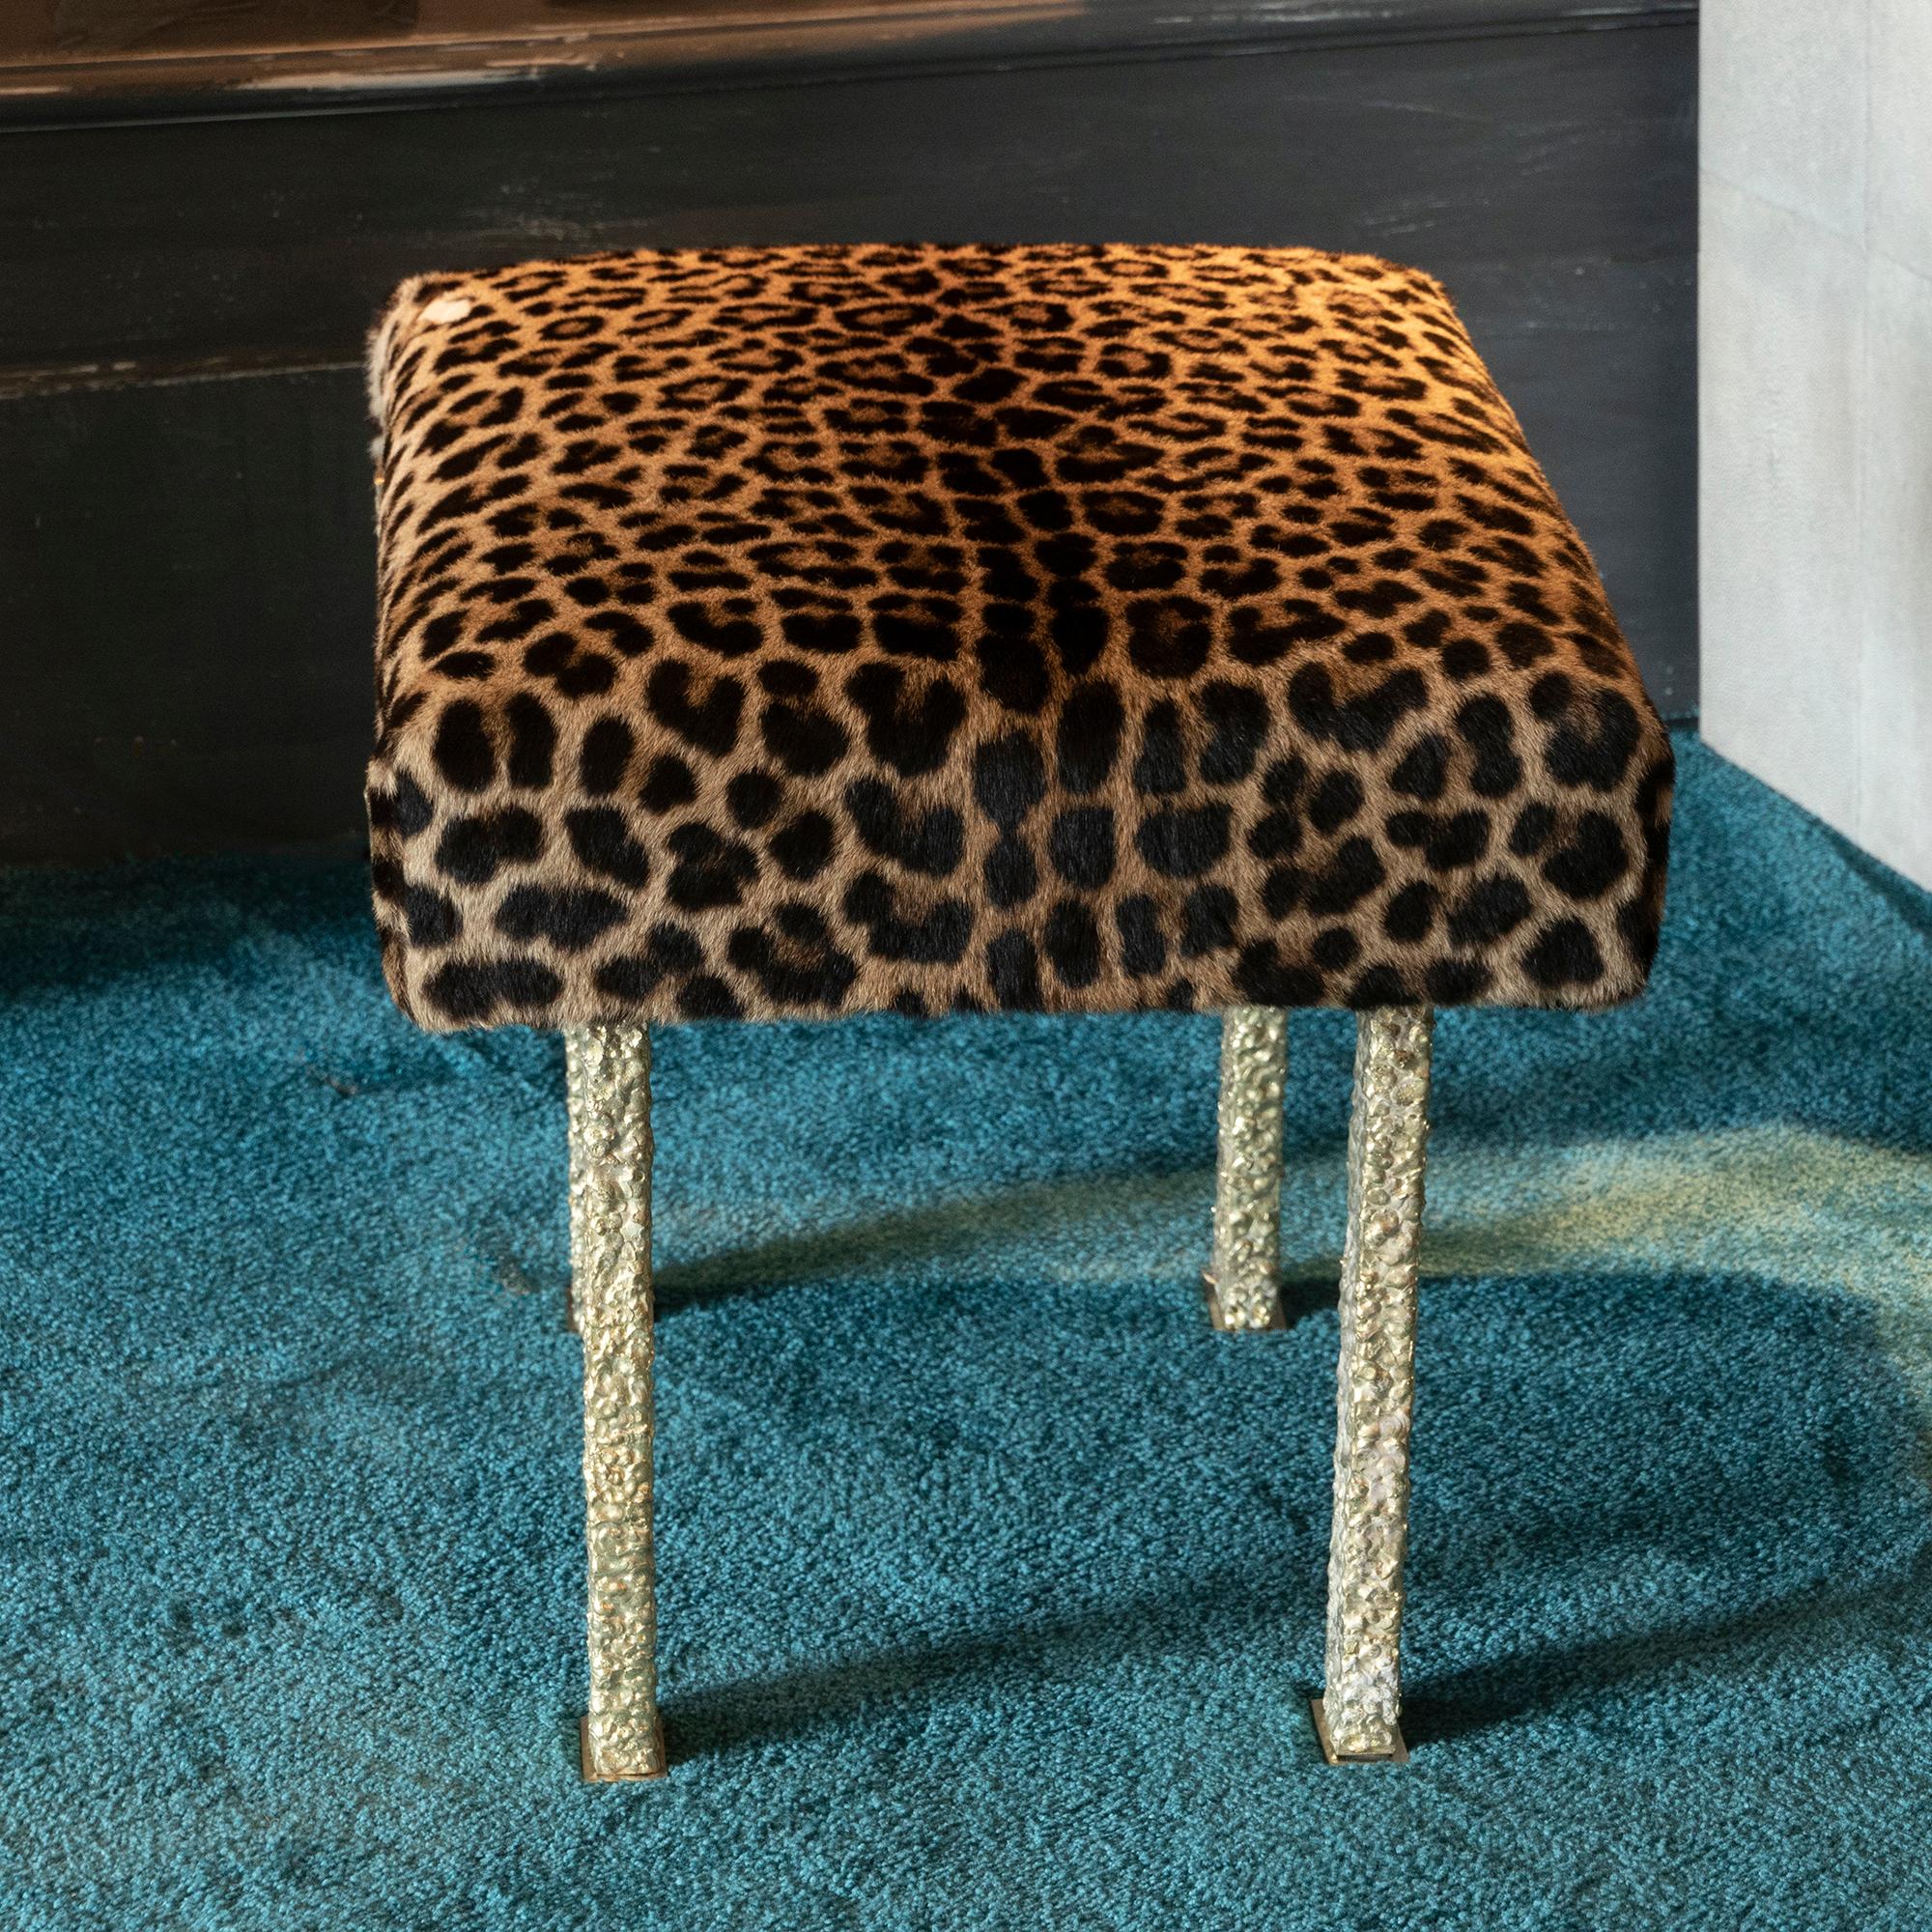 Contemporary Jaguar Skin Stool, Forged Brass Structure, Italy, 2018